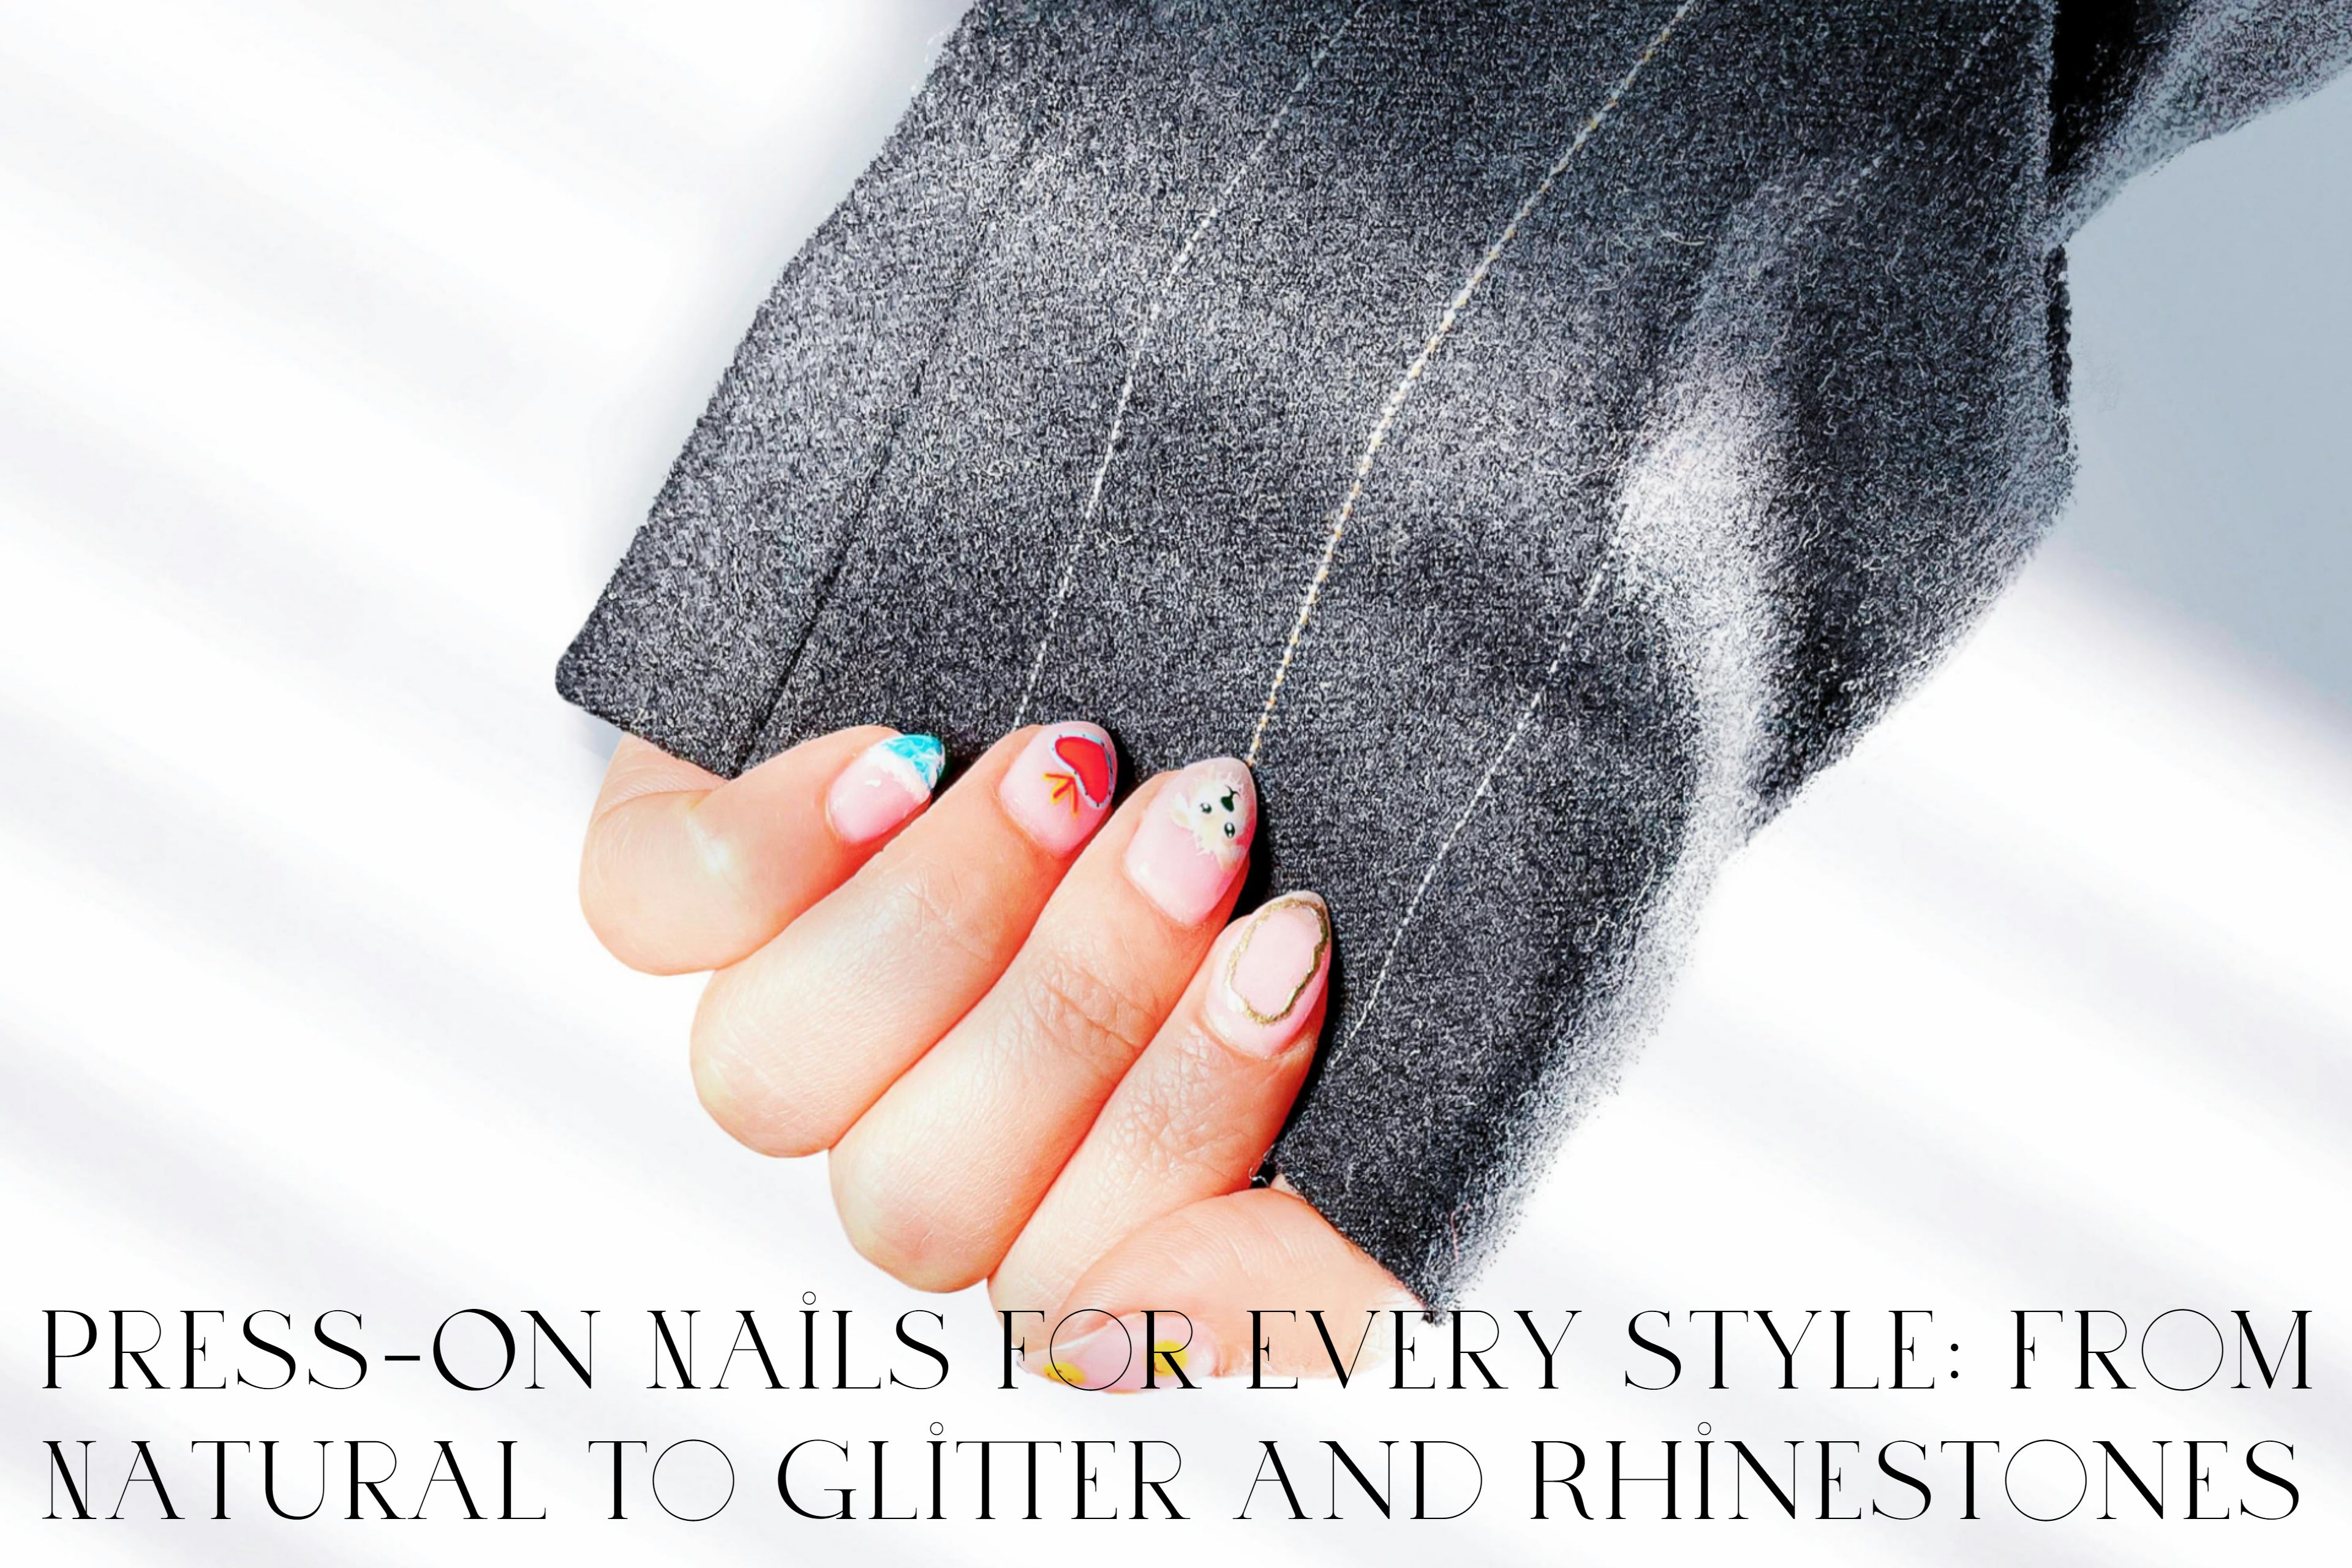 Press-On Nails for Every Style: From Natural to Glitter and Rhinestones